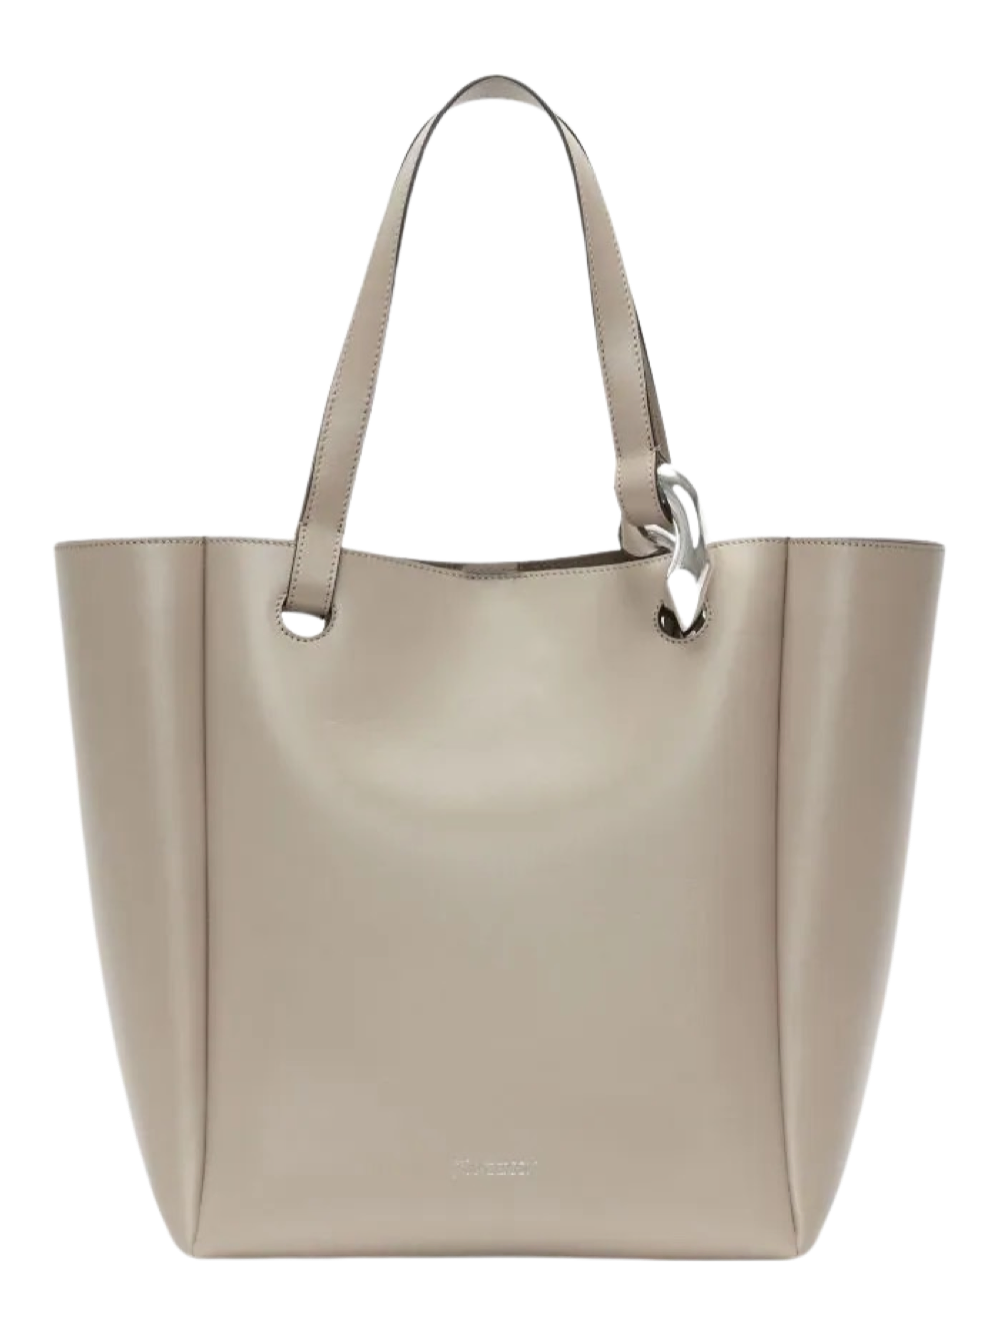 JW Anderson The JWA Corner Tote in Taupe